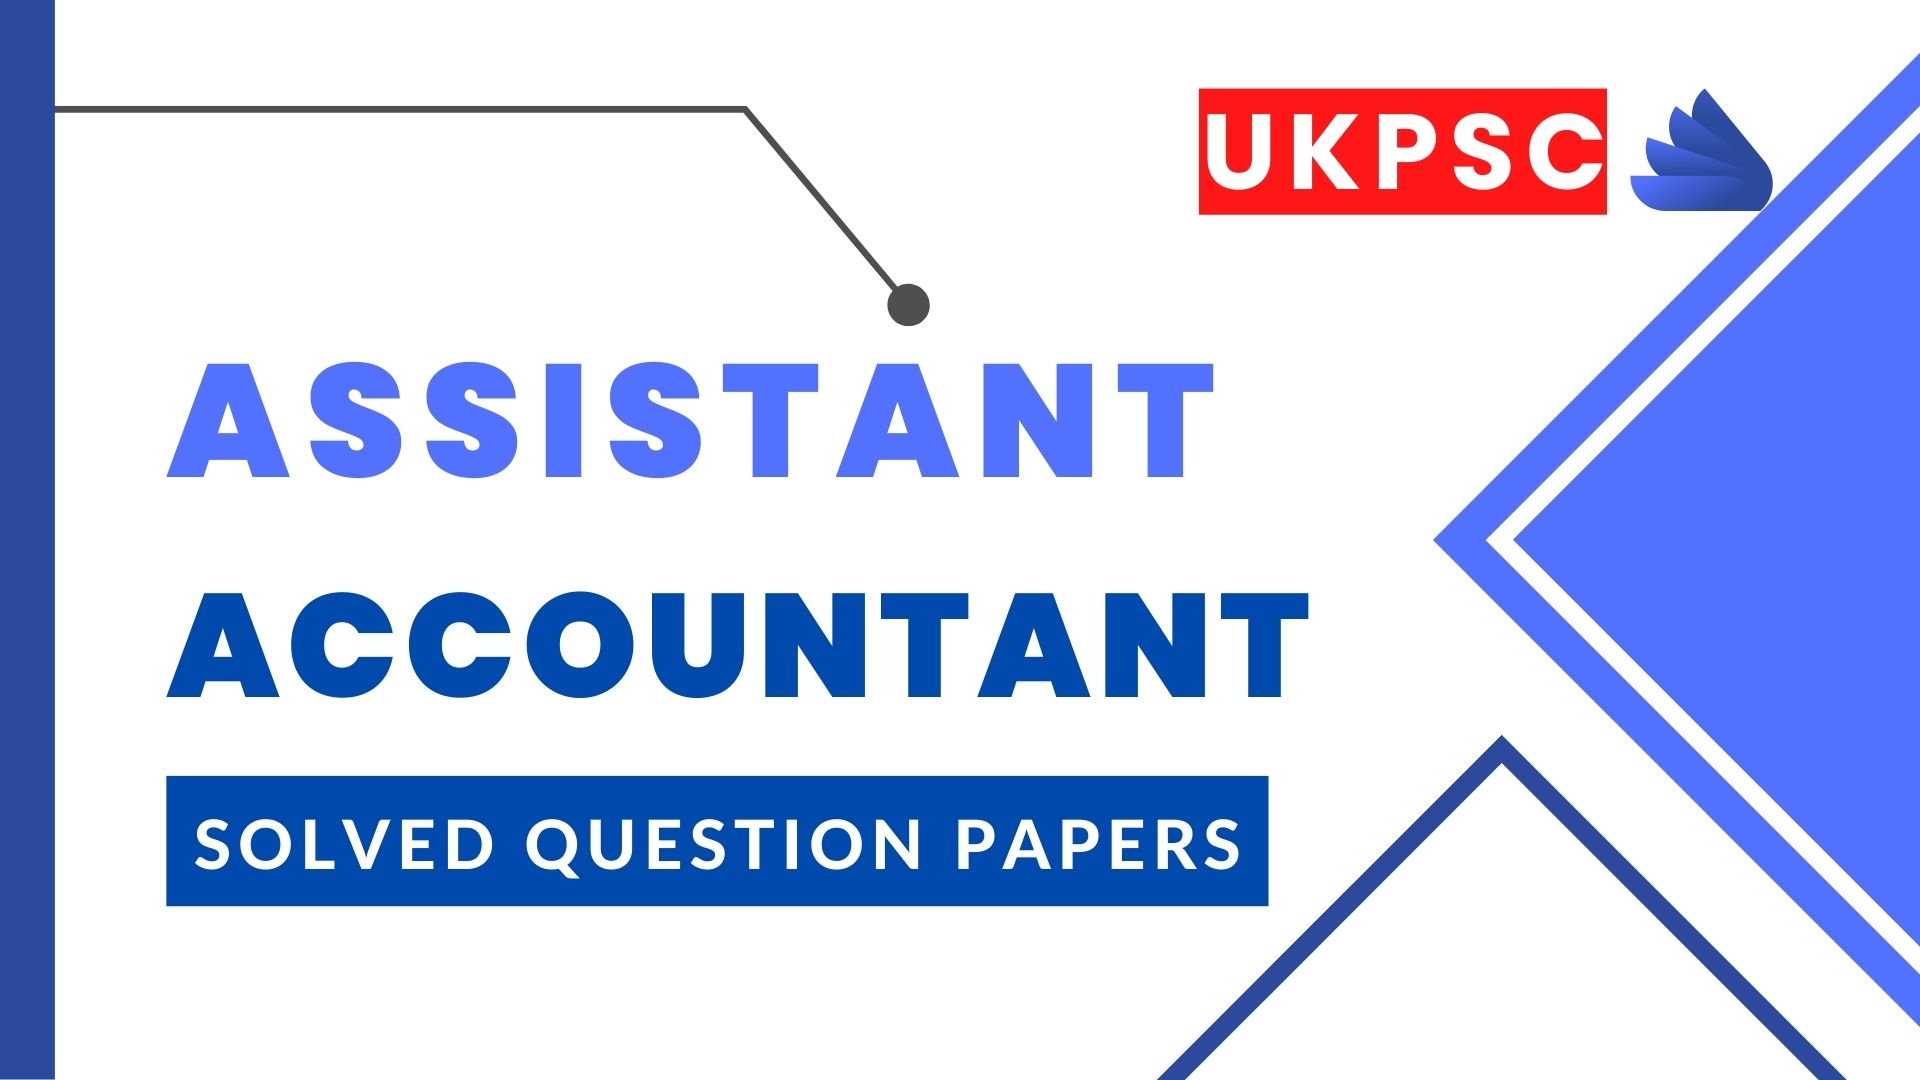 ukpsc assistant accountant solved question paper 2017